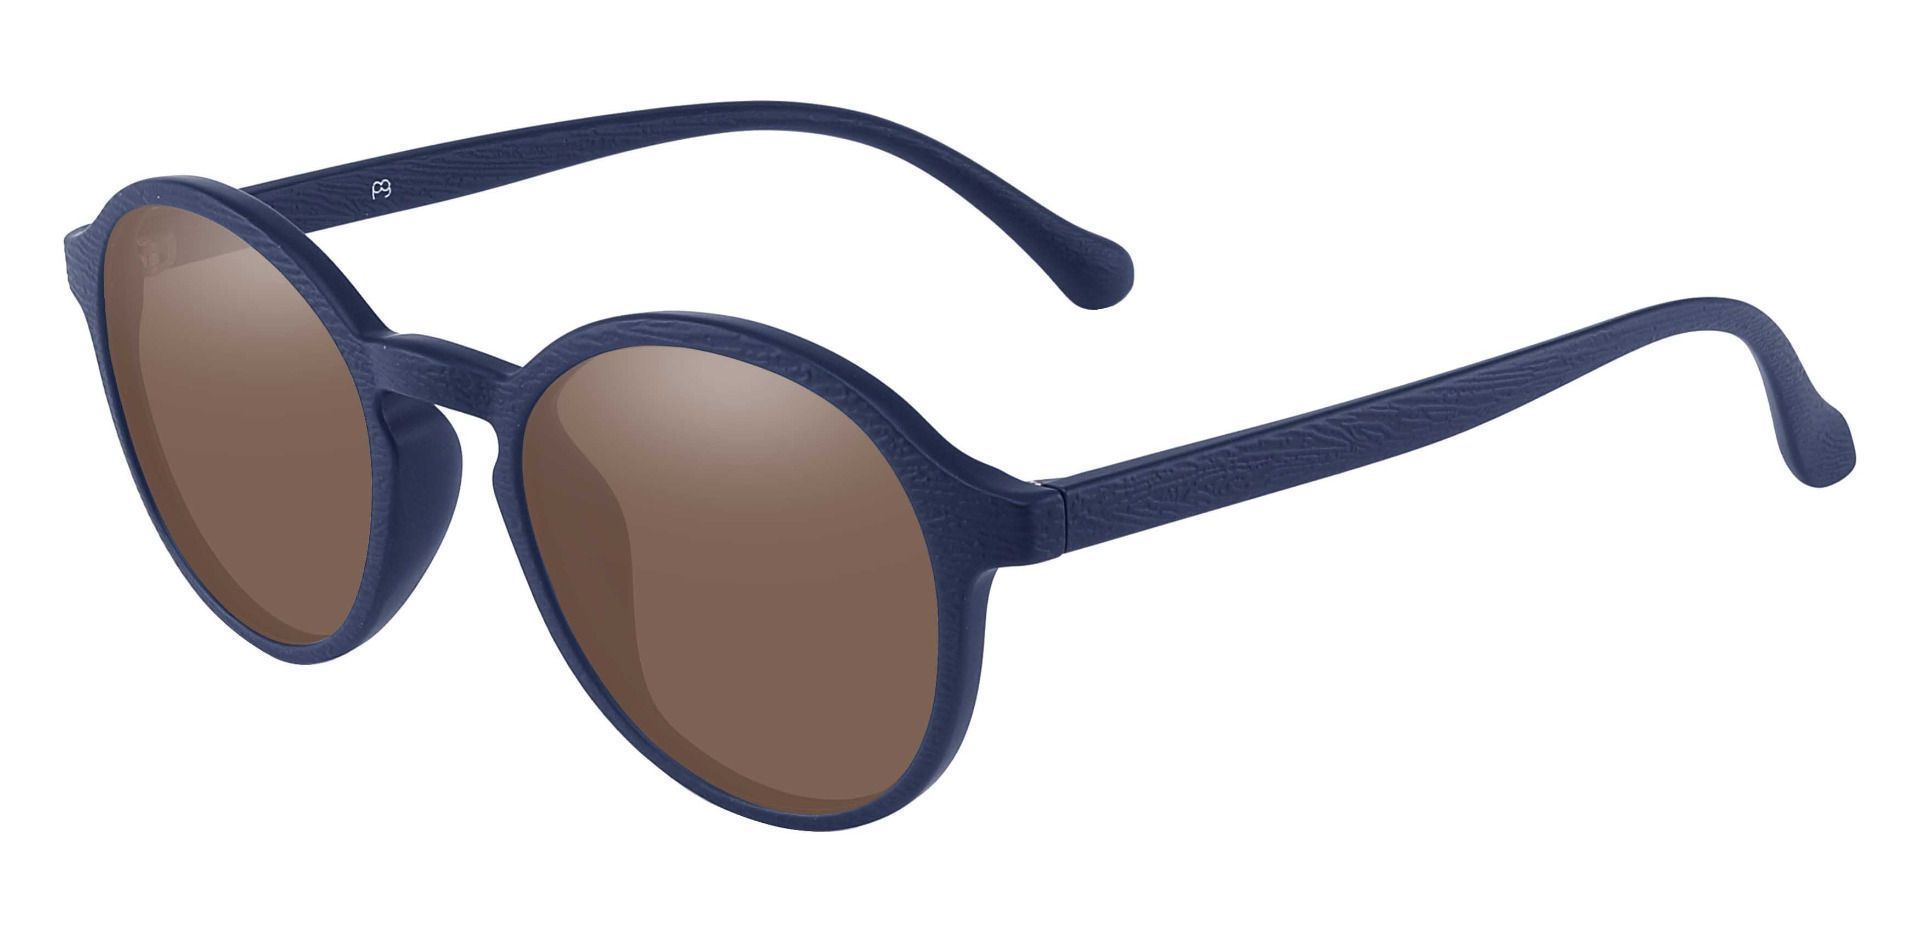 Whitney Round Reading Sunglasses - Blue Frame With Brown Lenses